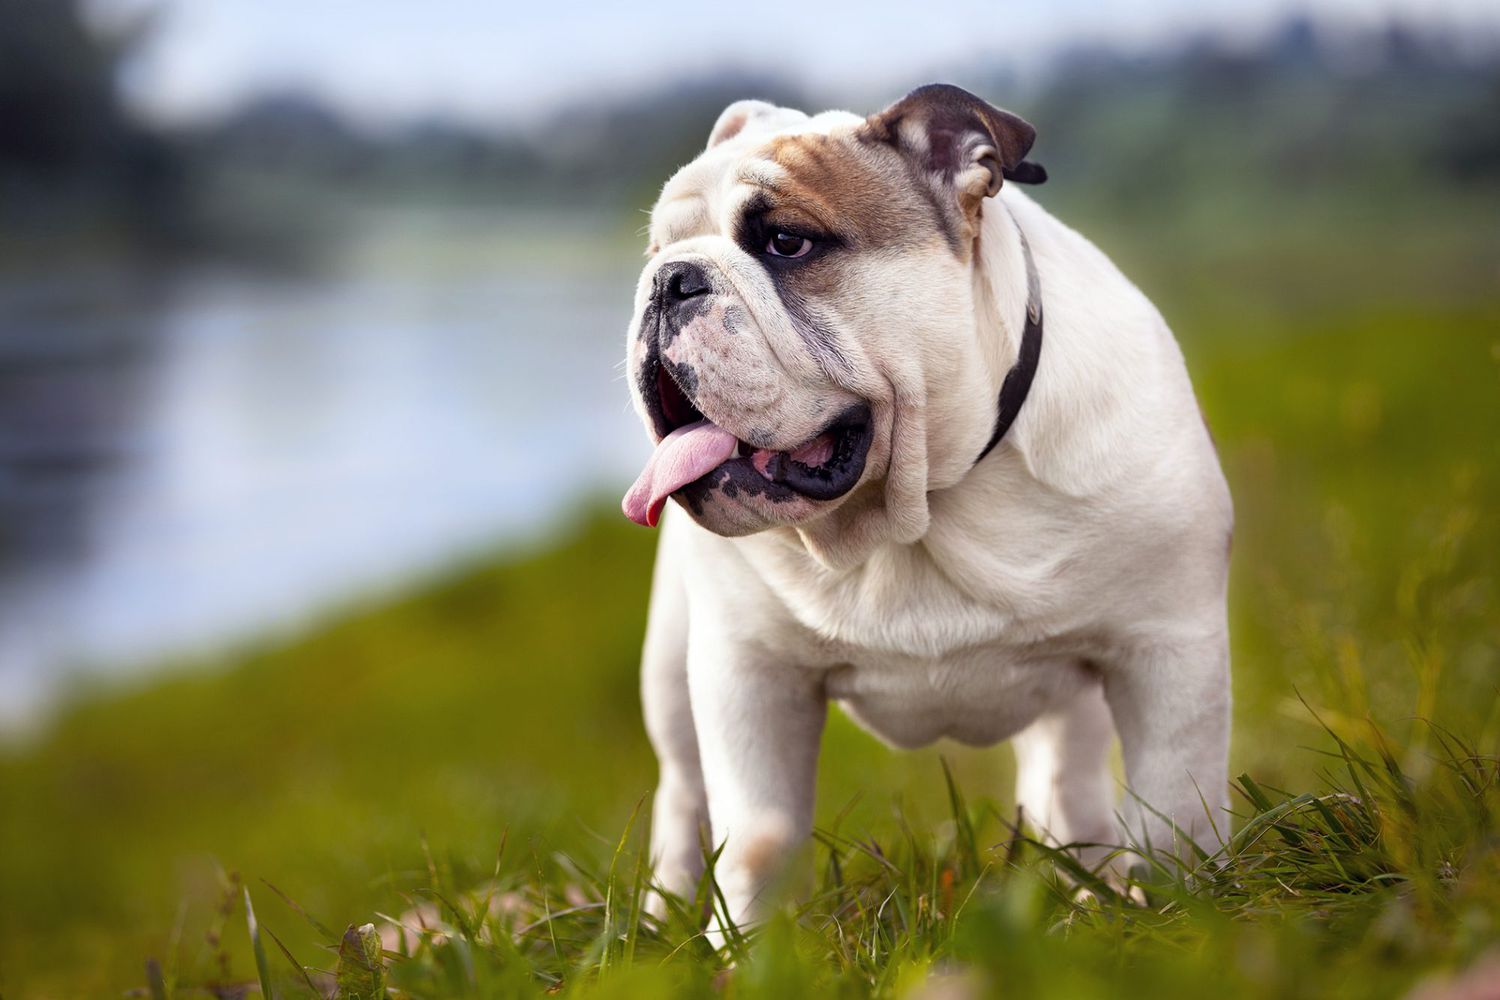 English Bulldog stands off to the side in grassy field, tongue out